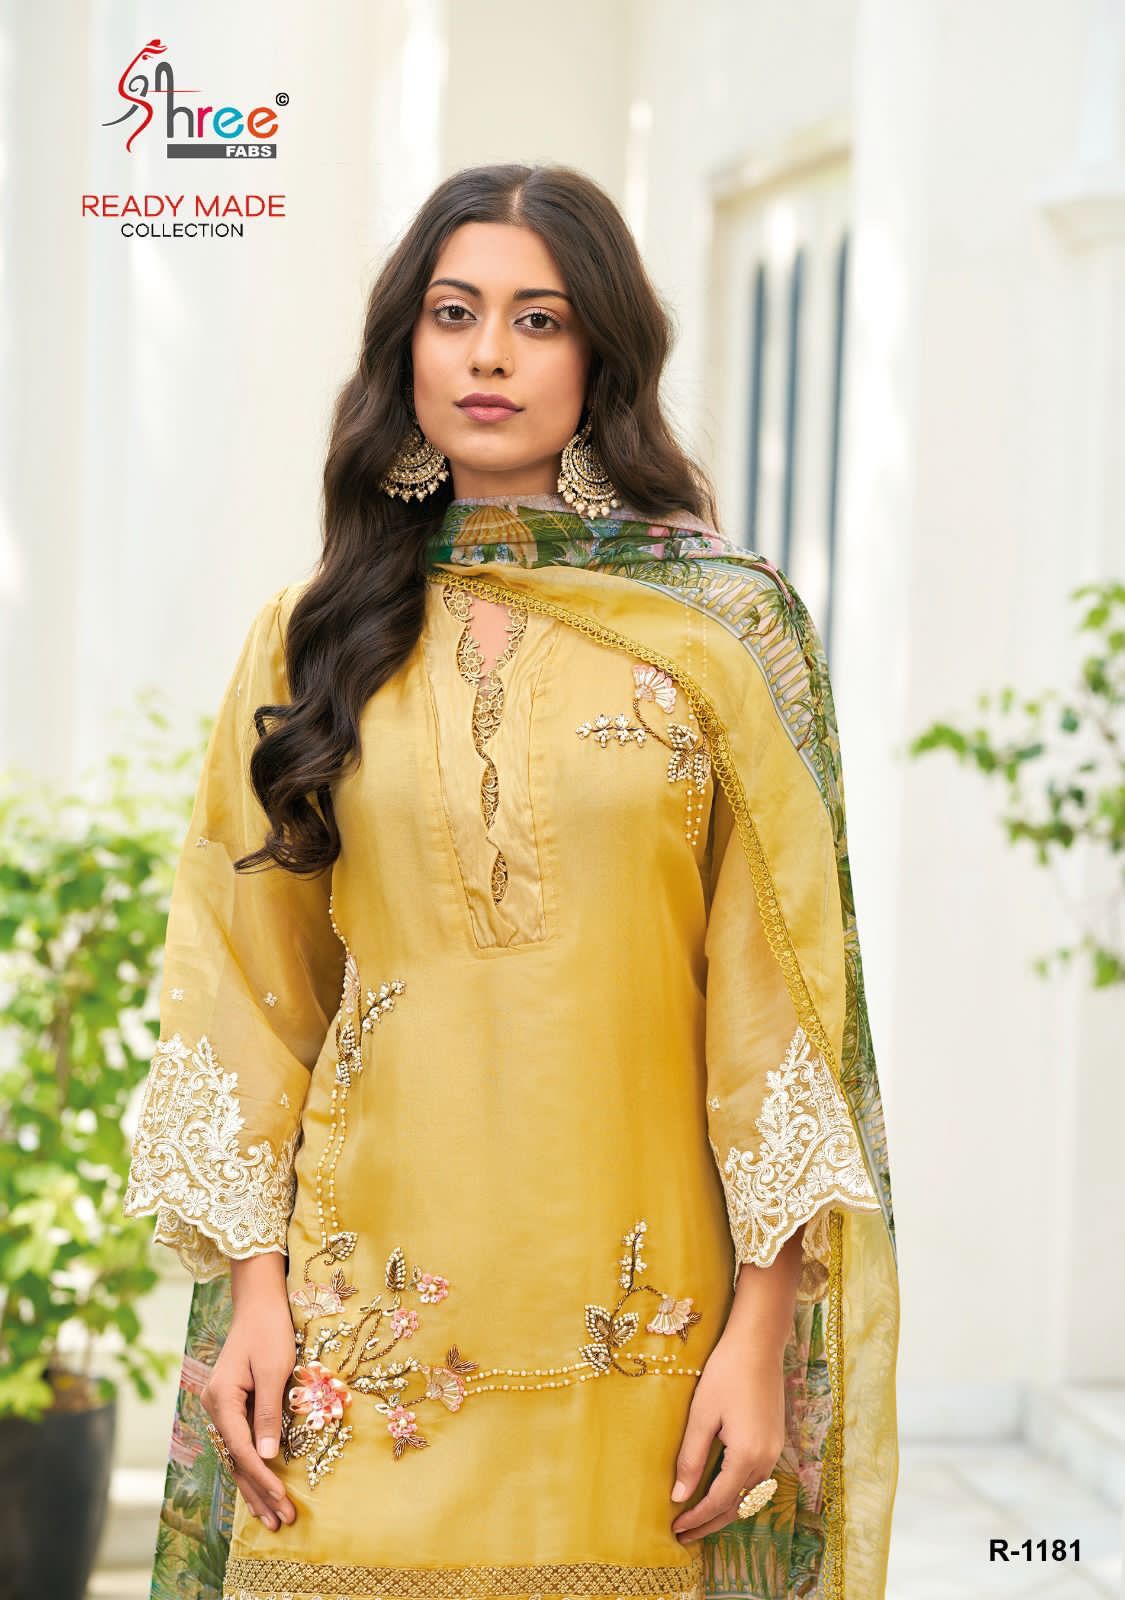 Shree Fabs D.no. R-1181 Organza With Hand Work Readymade Pakistani Suits Wholesale - jilaniwholesalesuit